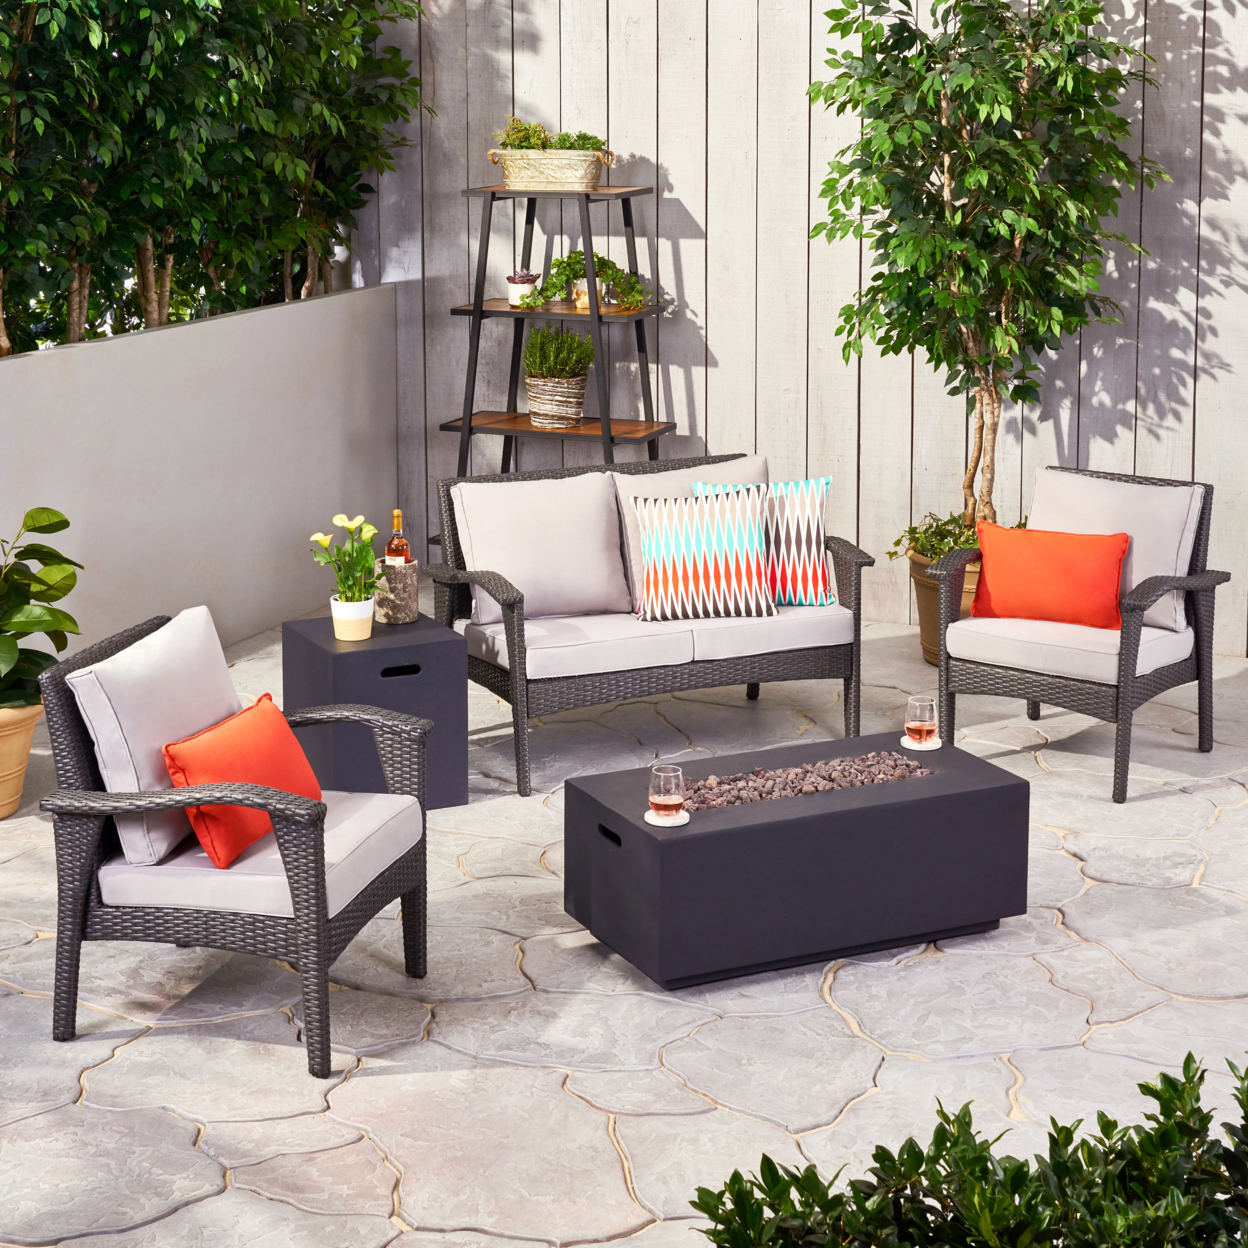 Deborah Outdoor 4 Seater Wicker Chat Set With Fire Pit - Gray + Light Gray + Dark Gray